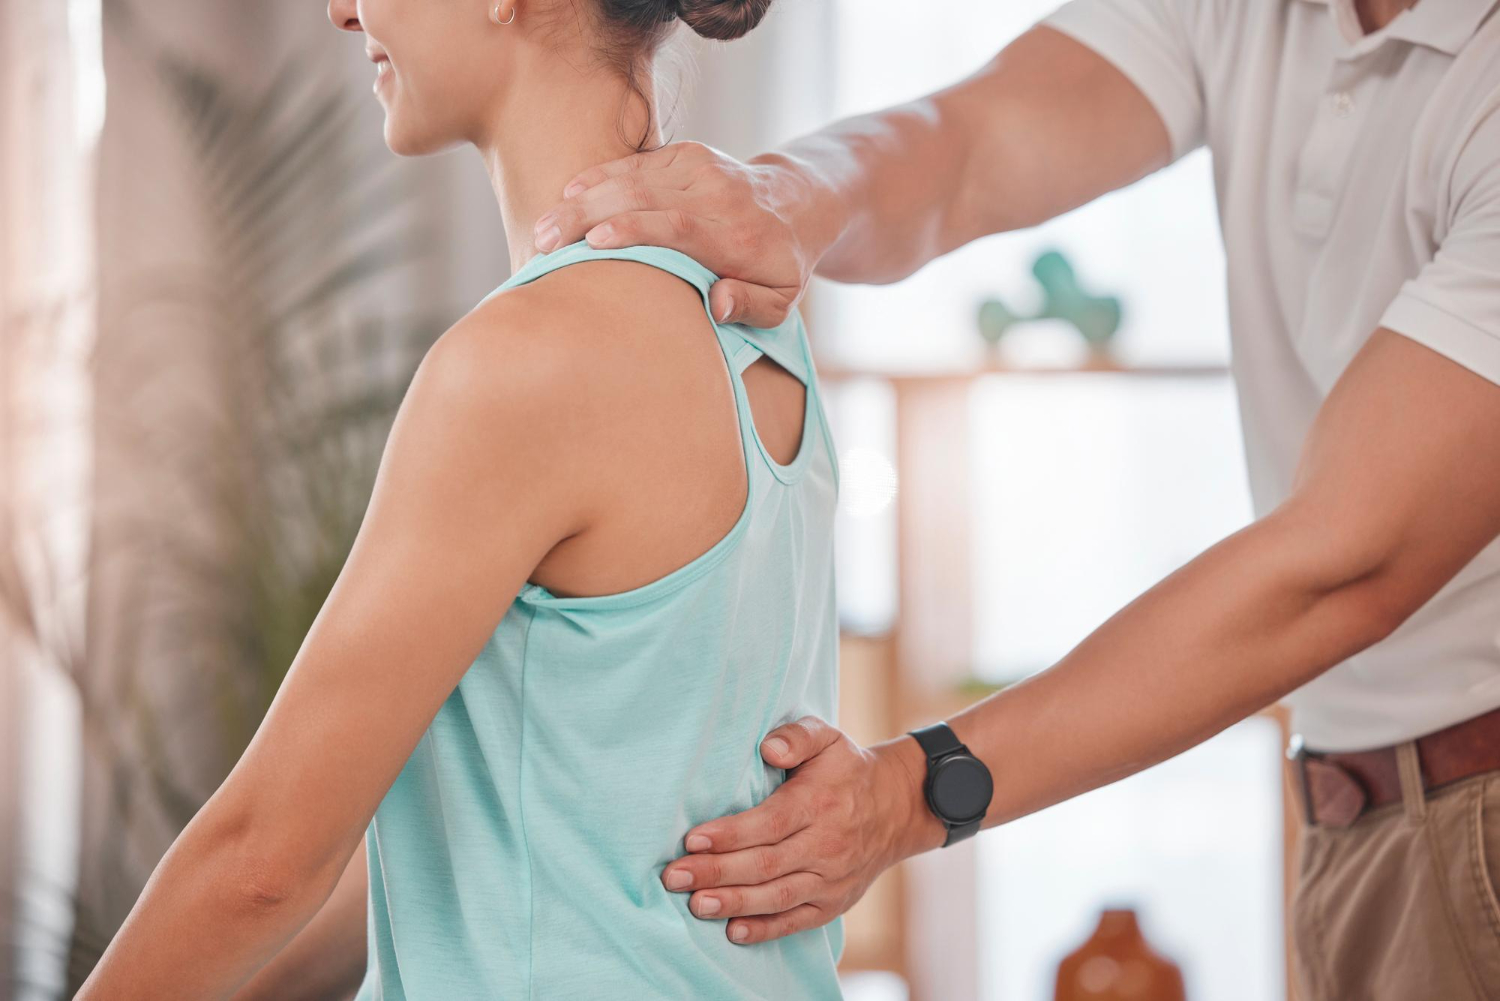 chiropractor-consultation-woman-physical-therapy-her-back-pain-muscle-stress-body-performance-physiotherapy-support-athlete-with-physiotherapist-help-with-rehabilitation